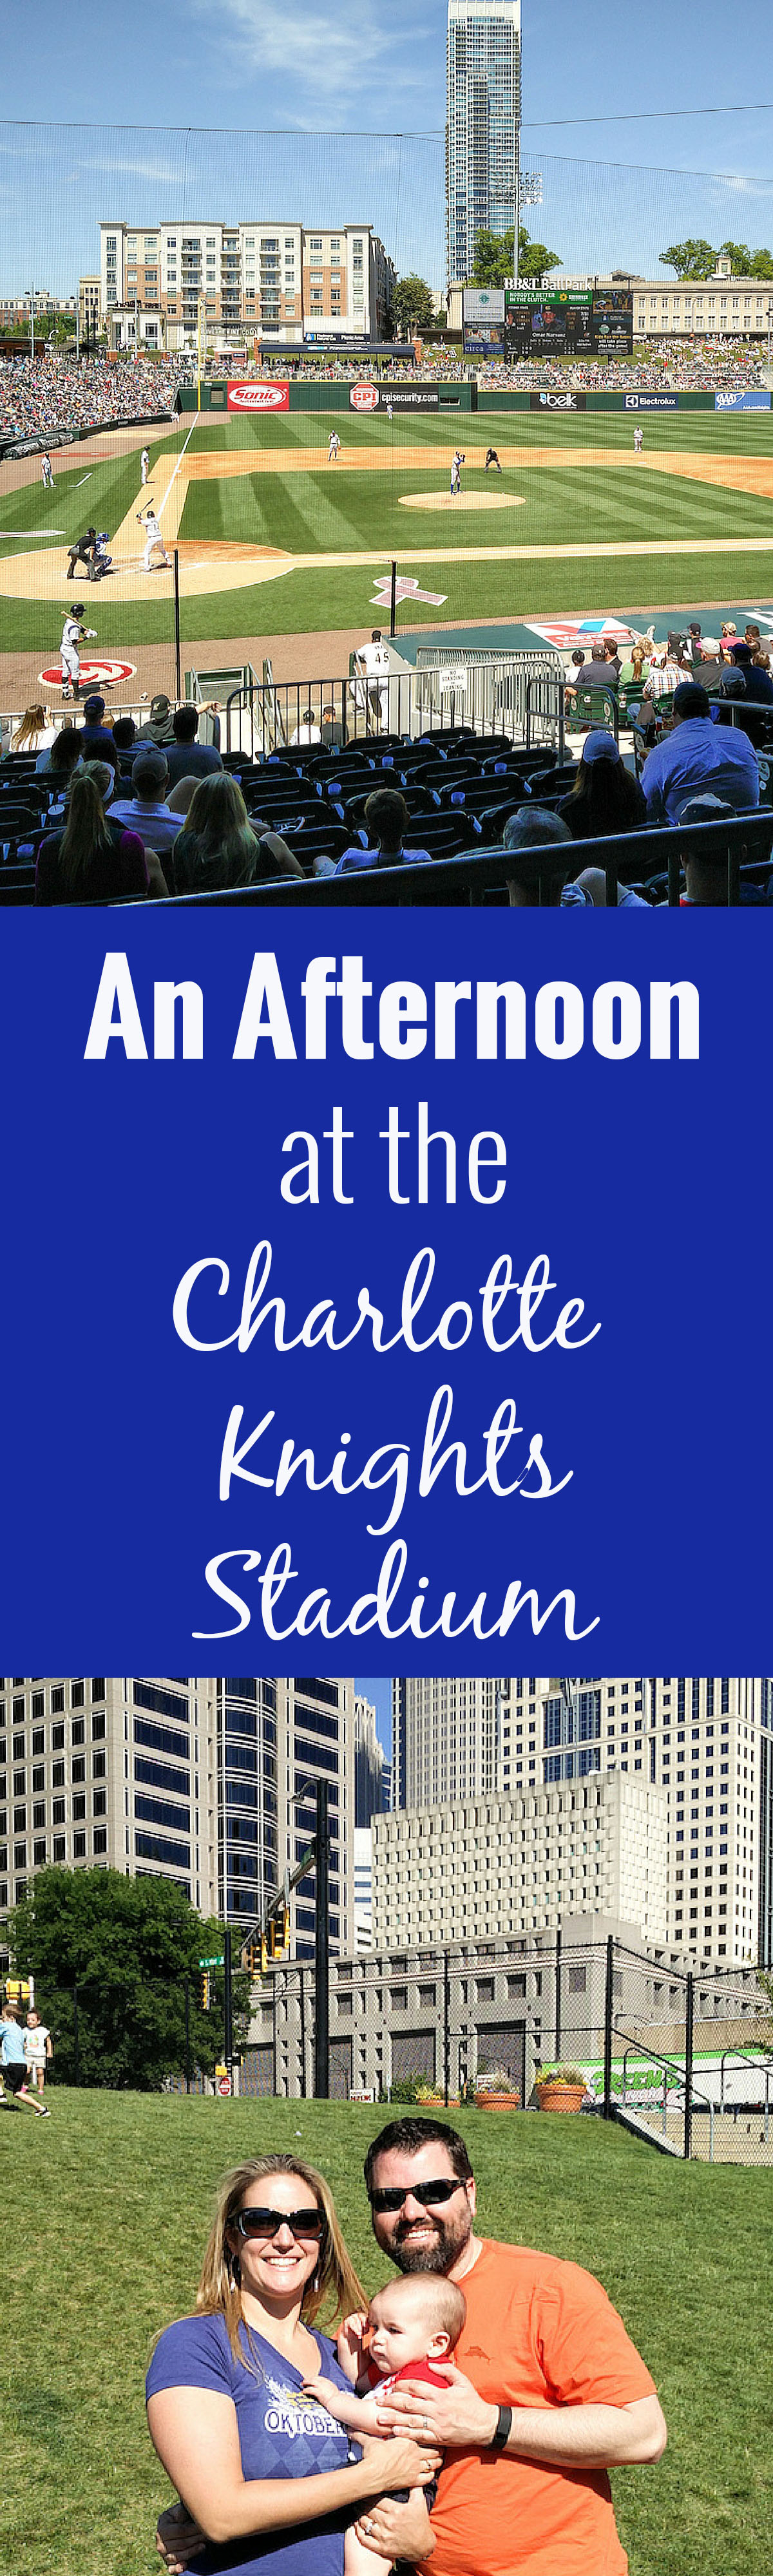 An Afternoon at the Charlotte Knights Stadium. The stadium had a surprisingly good selection of craft beer to choose from, plus going to the game is a fun day out for kids.